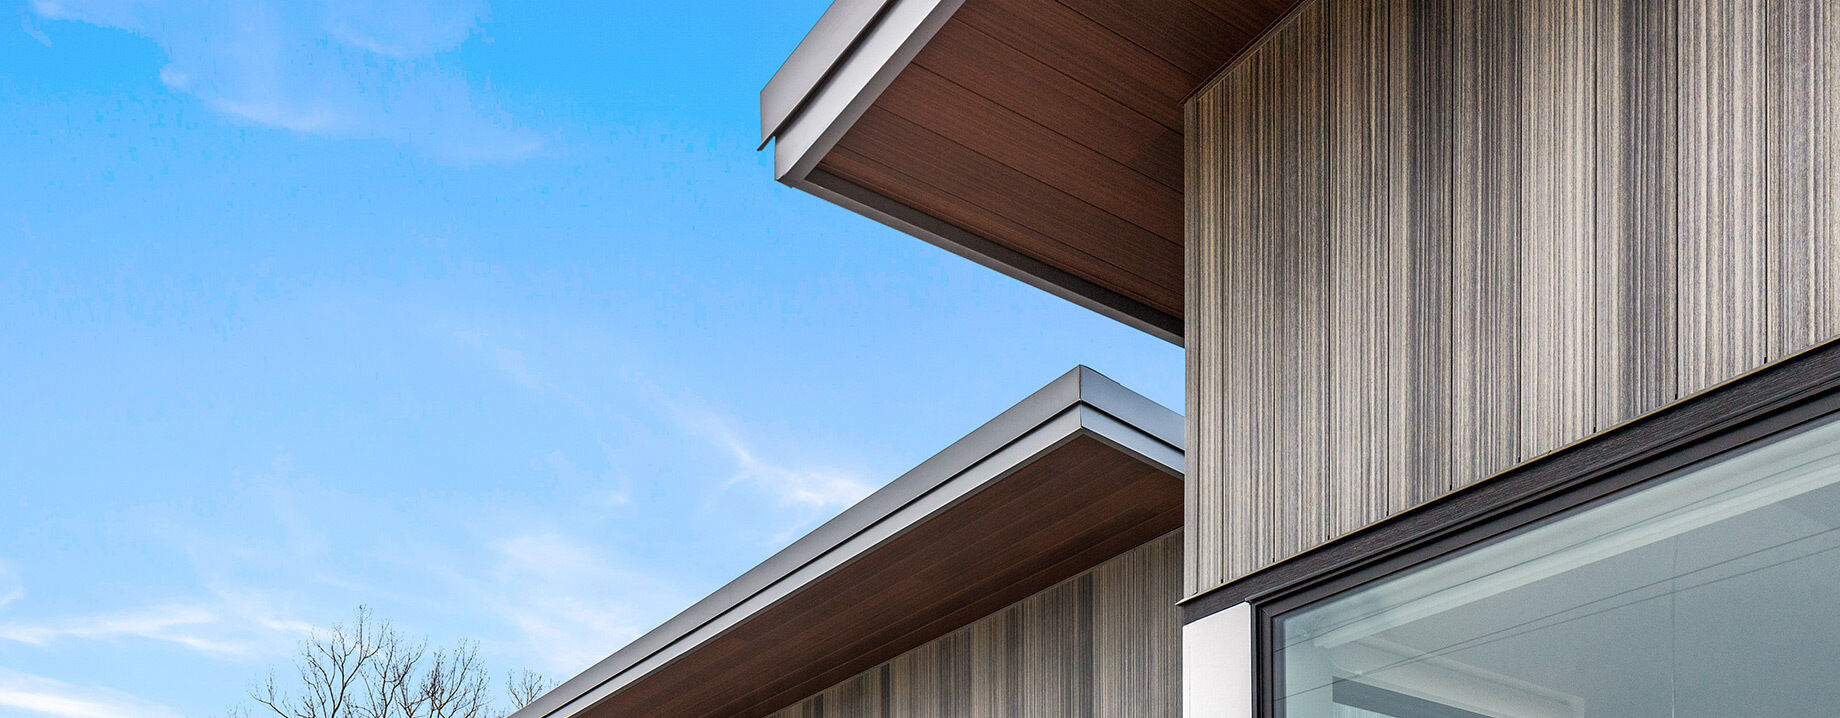 Vented Vesta Soffit: Protecting Your Home Investment with Proper Ventilation